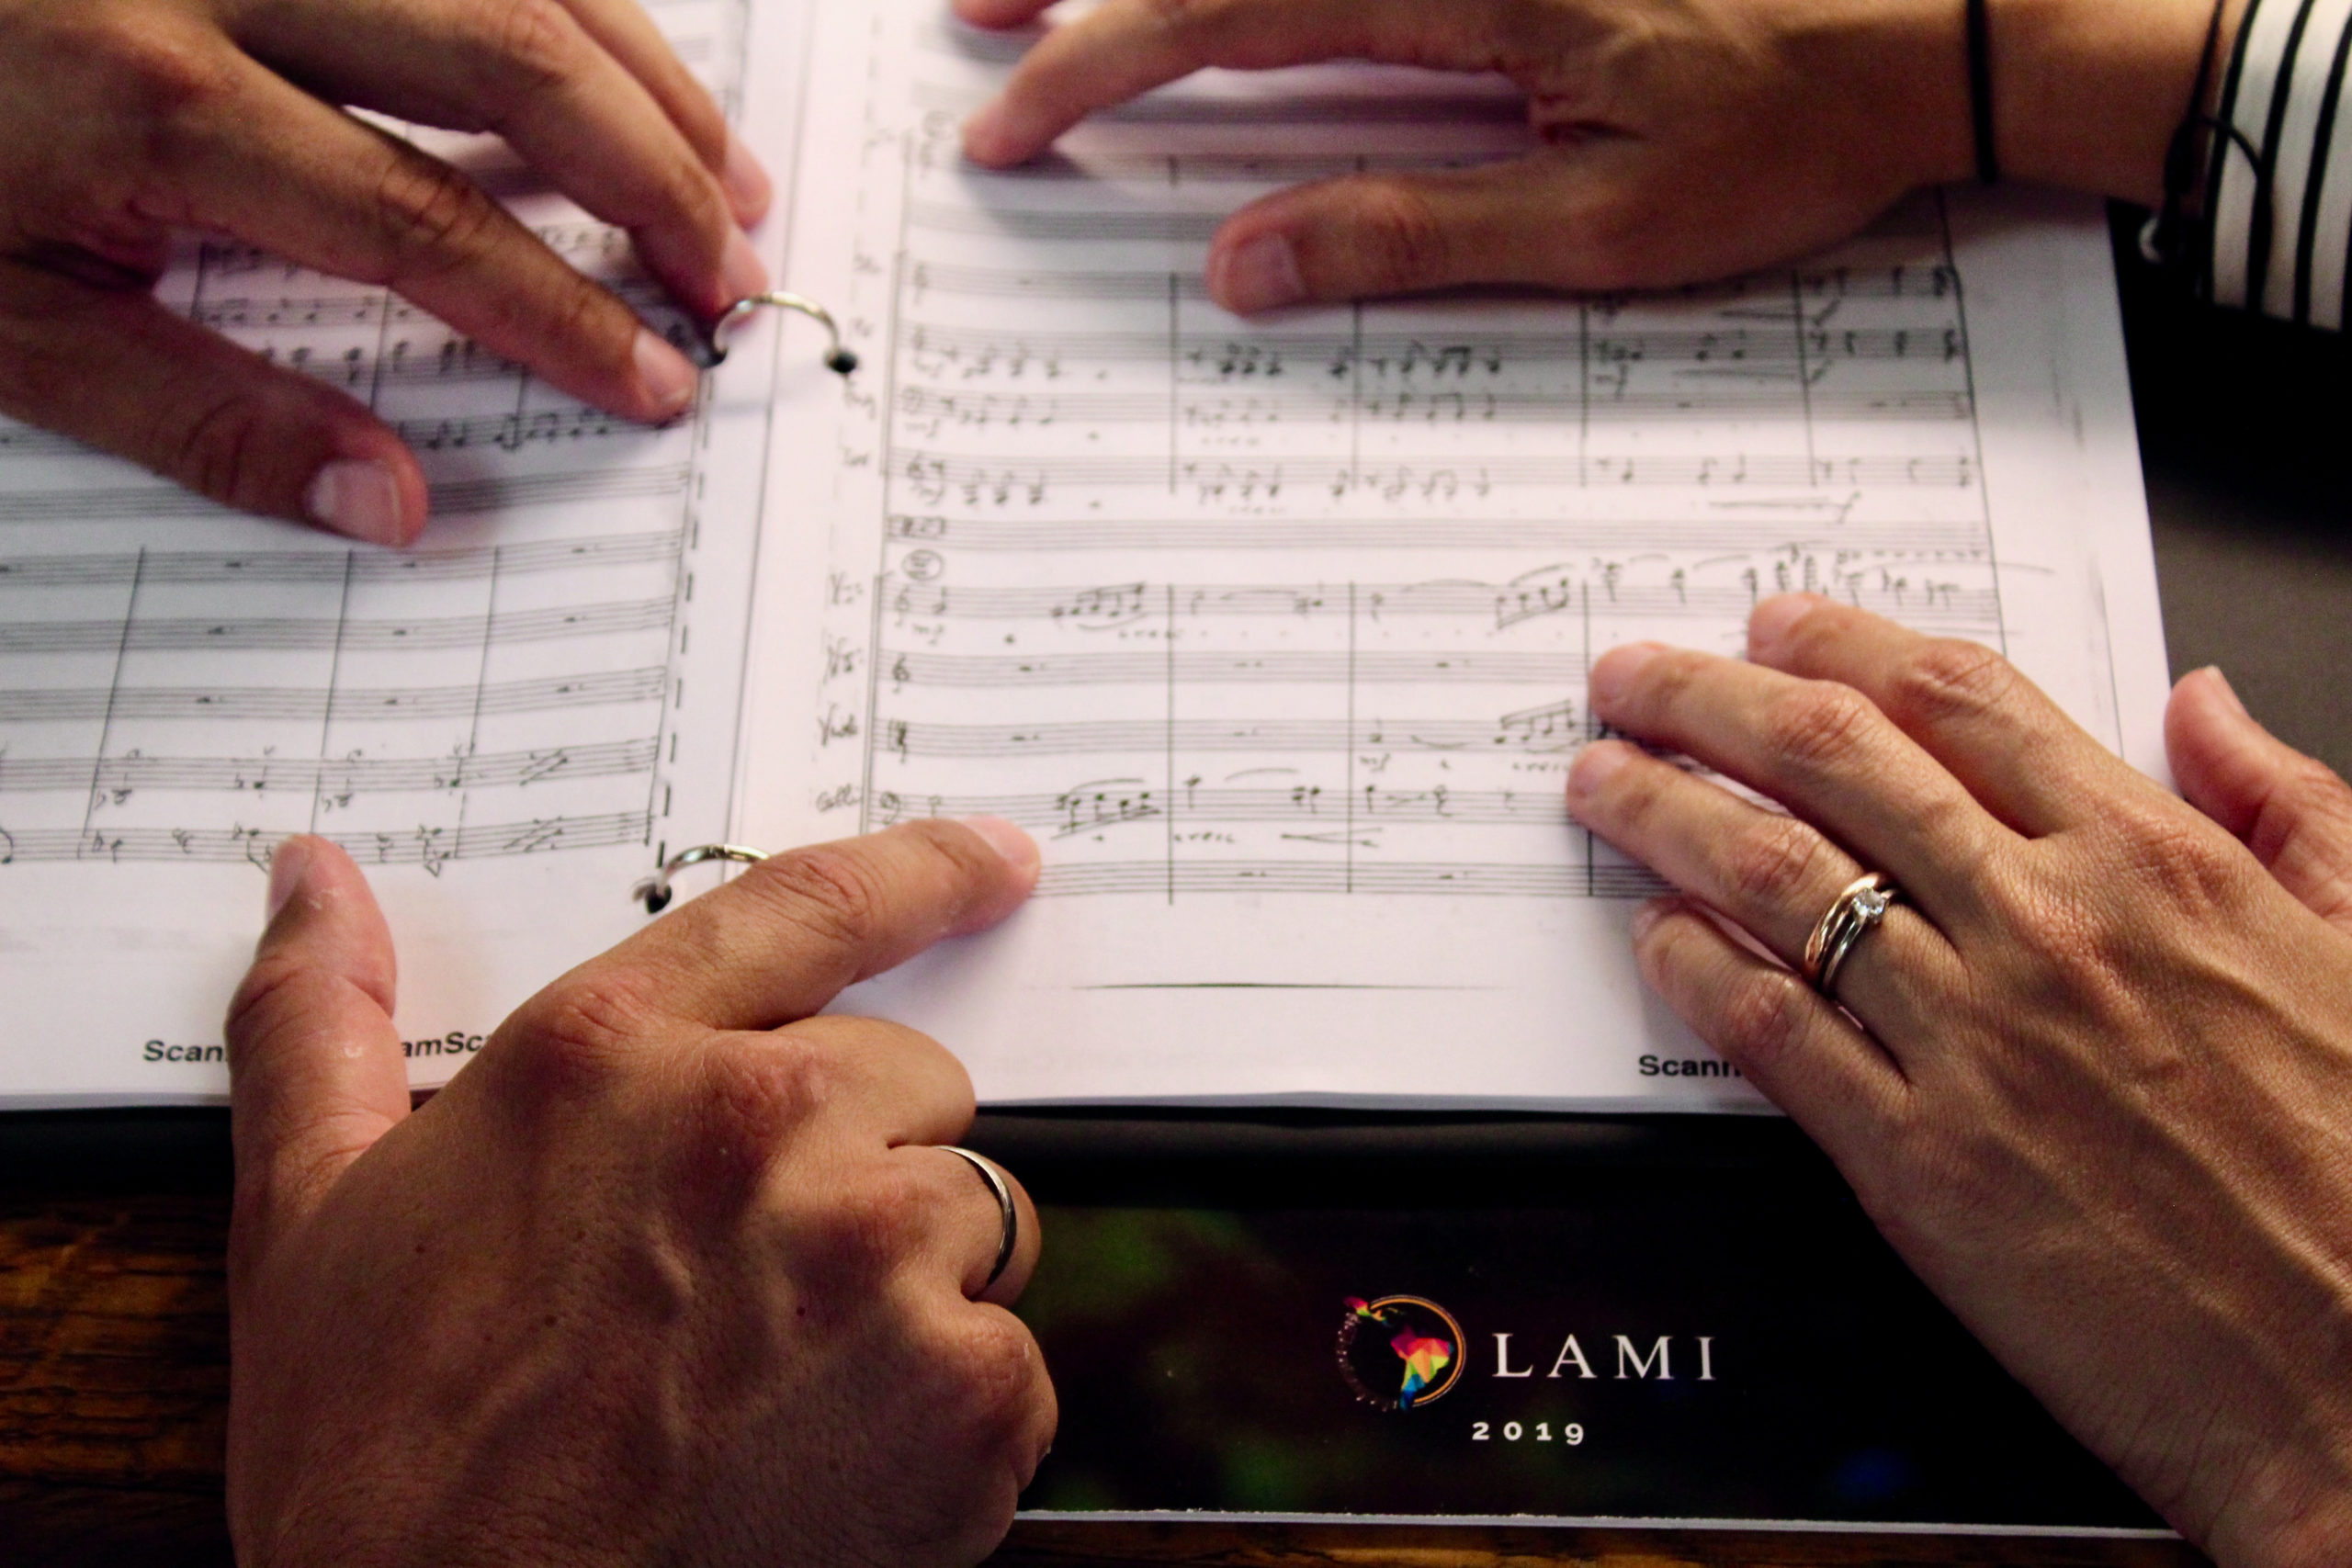 Maria and Regulo point to music notes on score